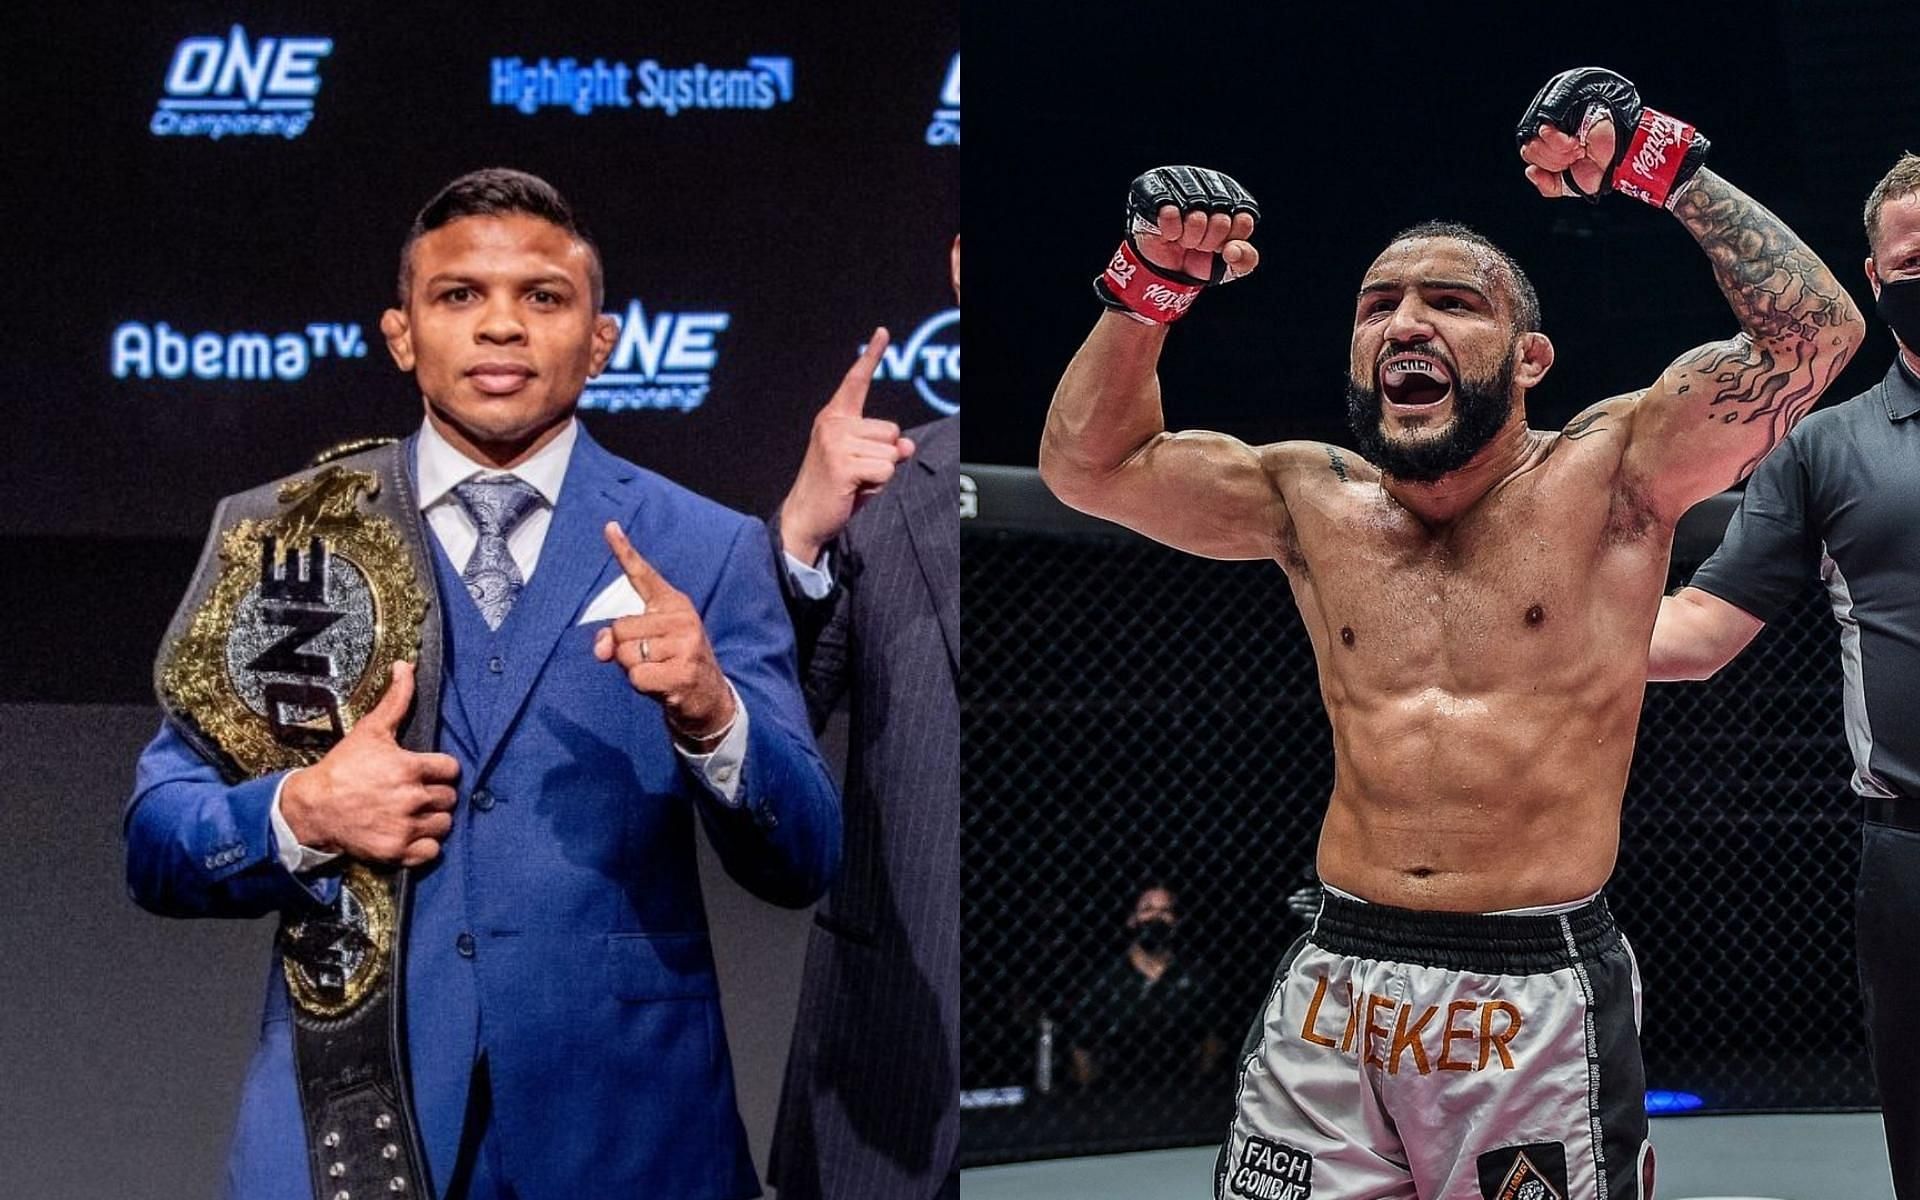 The much-anticipated grudge match between Bibiano Fernandes (left) and John Lineker (right) will finally happen at ONE Championship: Lights Out. (Images courtesy of ONE Championship)